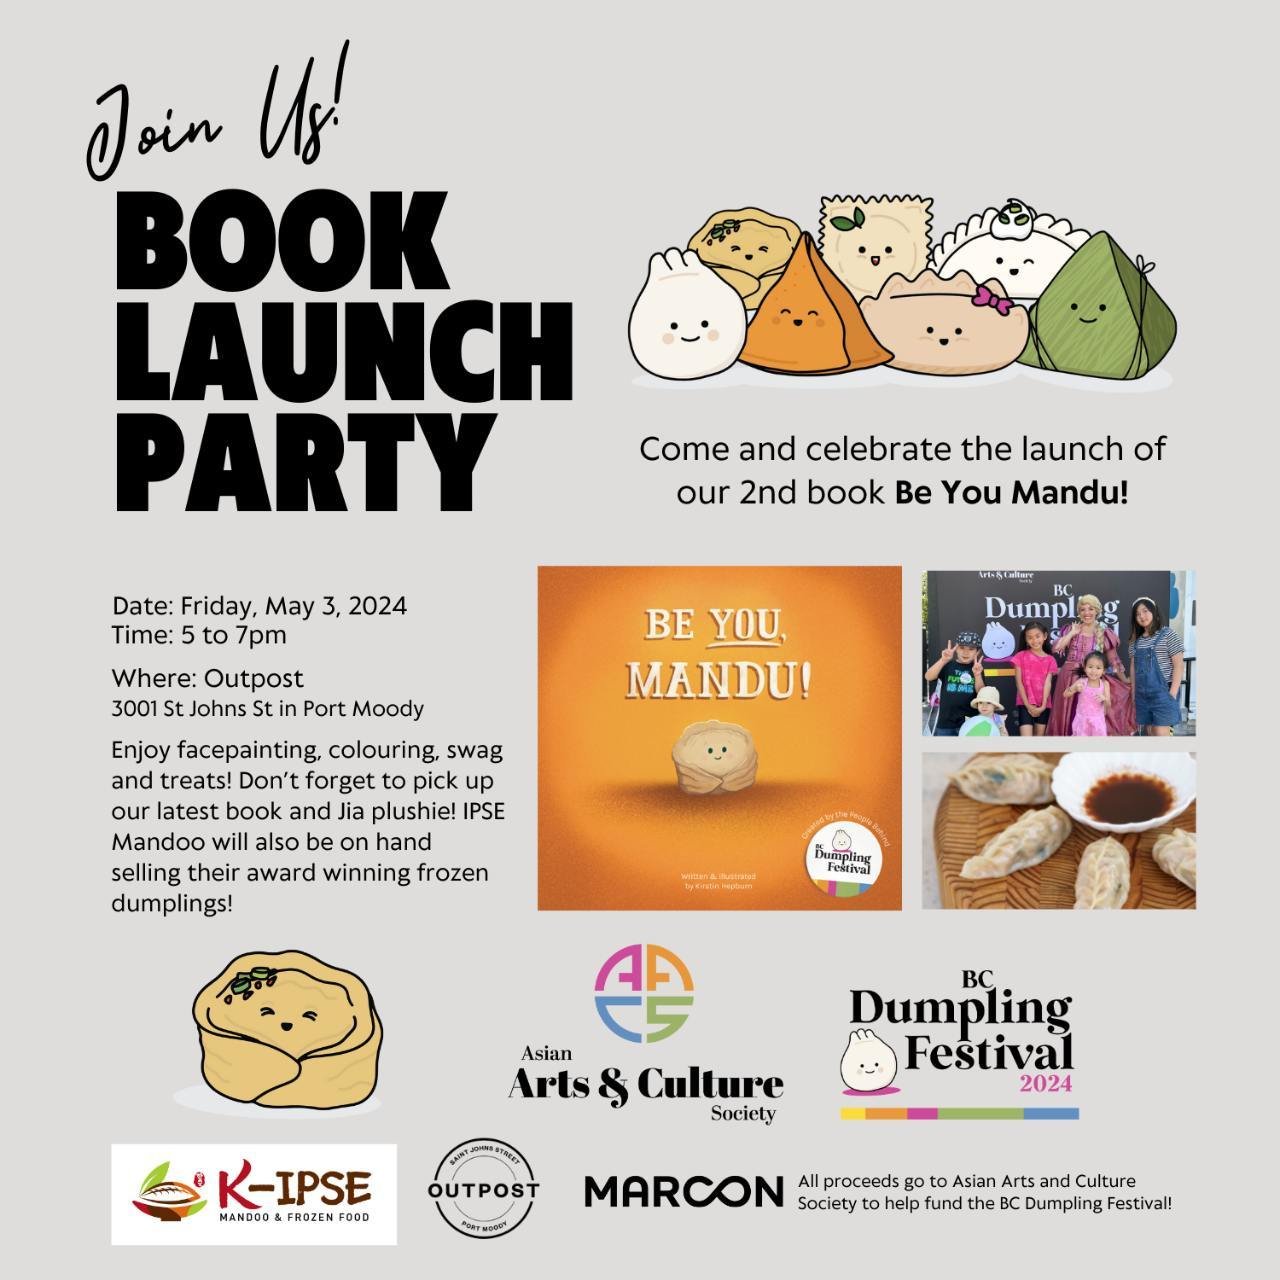 Got plans tomorrow! Join us at the &quot;Be You Mandu&quot; book launch on Friday, May 3rd from 5 to 7pm at Outpost in Port Moody!

We will have free face painting, our spin the wheel to win some great dumpling swag, our books and plushies for purcha